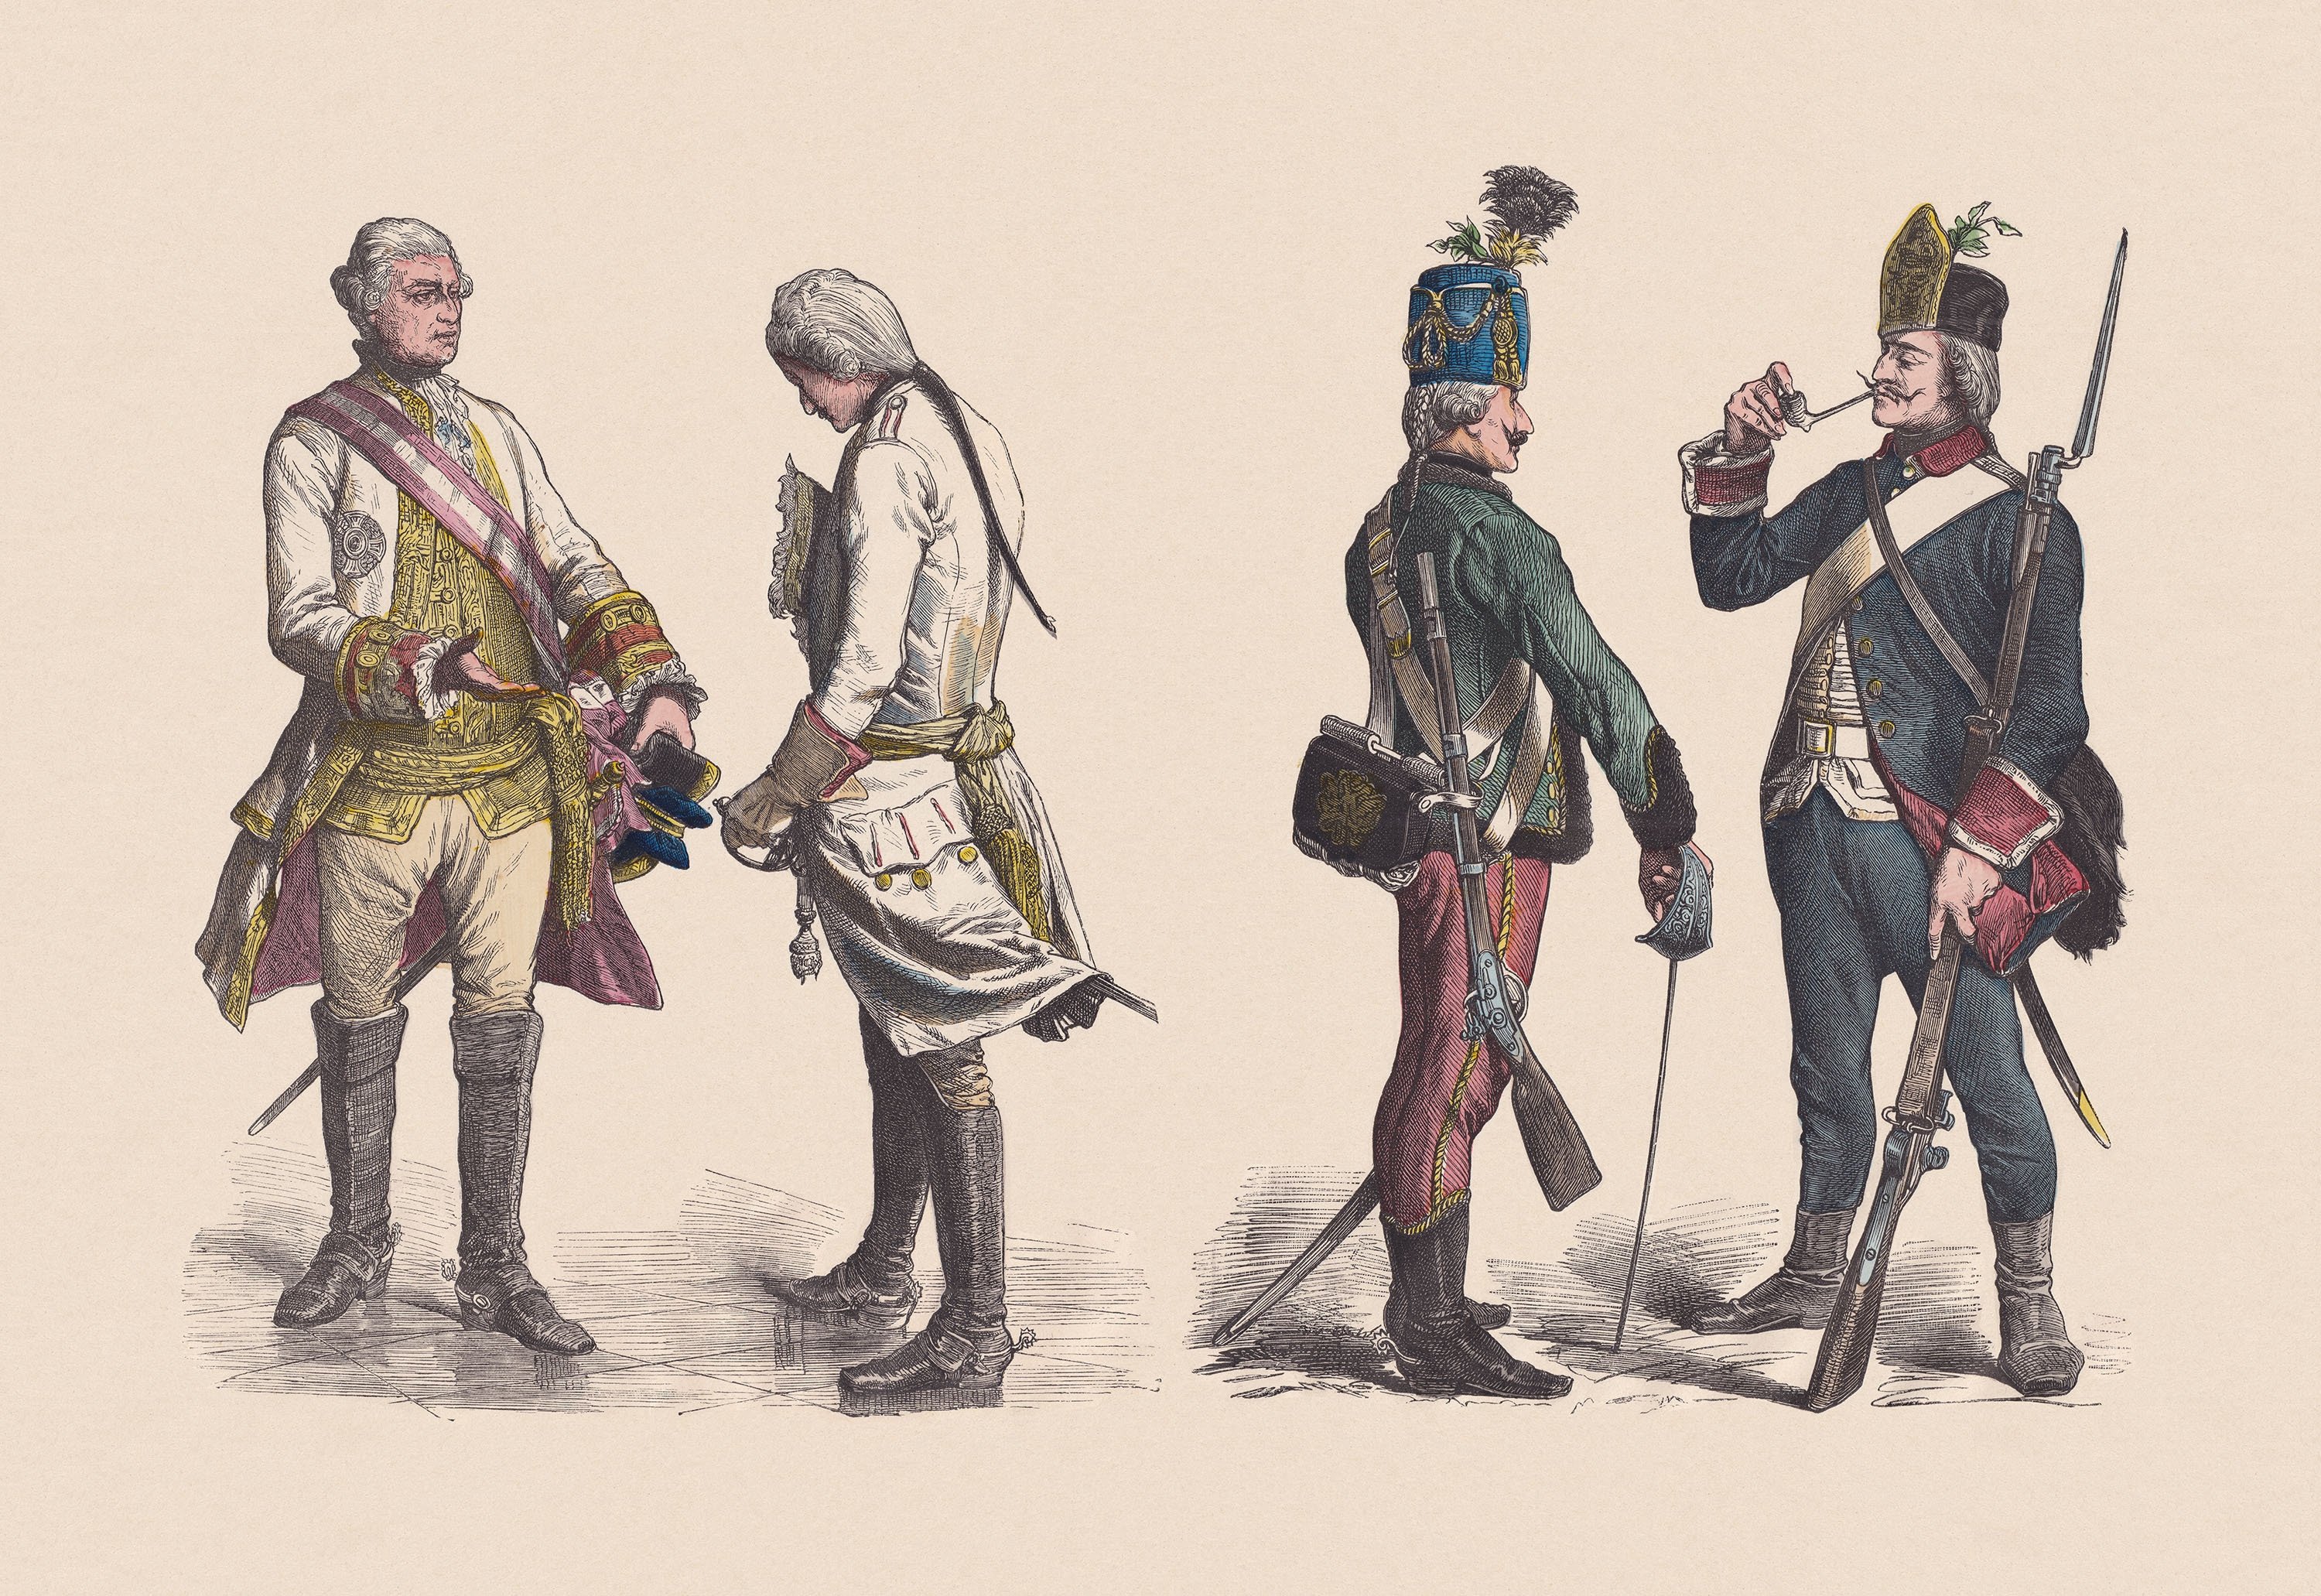 From left to right, Austrian military uniforms of generals, officers, hussars and infantrymen in the second half of the 18th century are depicted. (Wikimedia Photo)